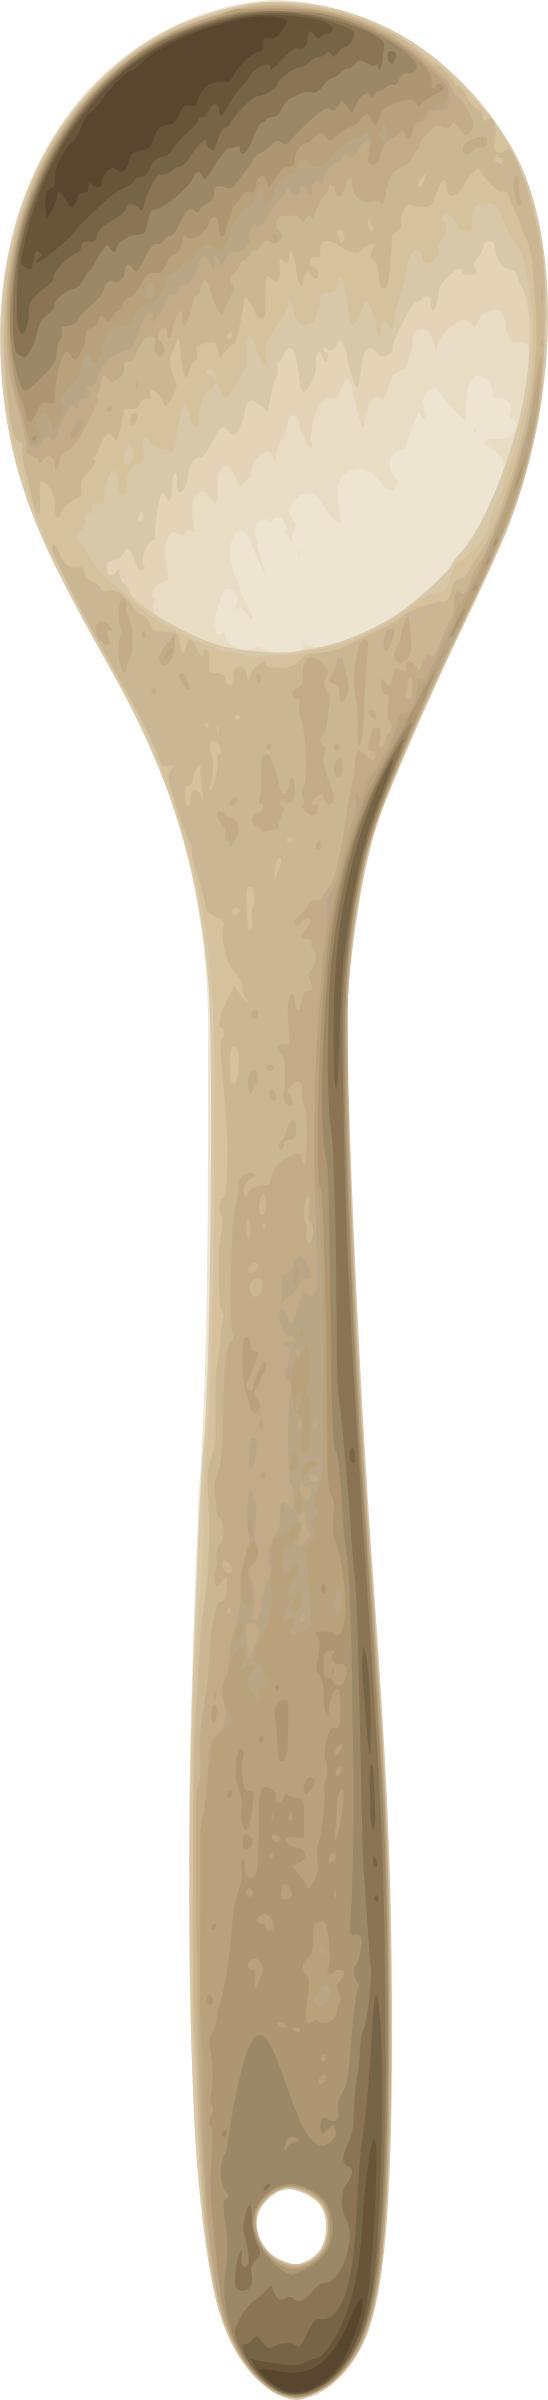 Cooking spoon png transparent